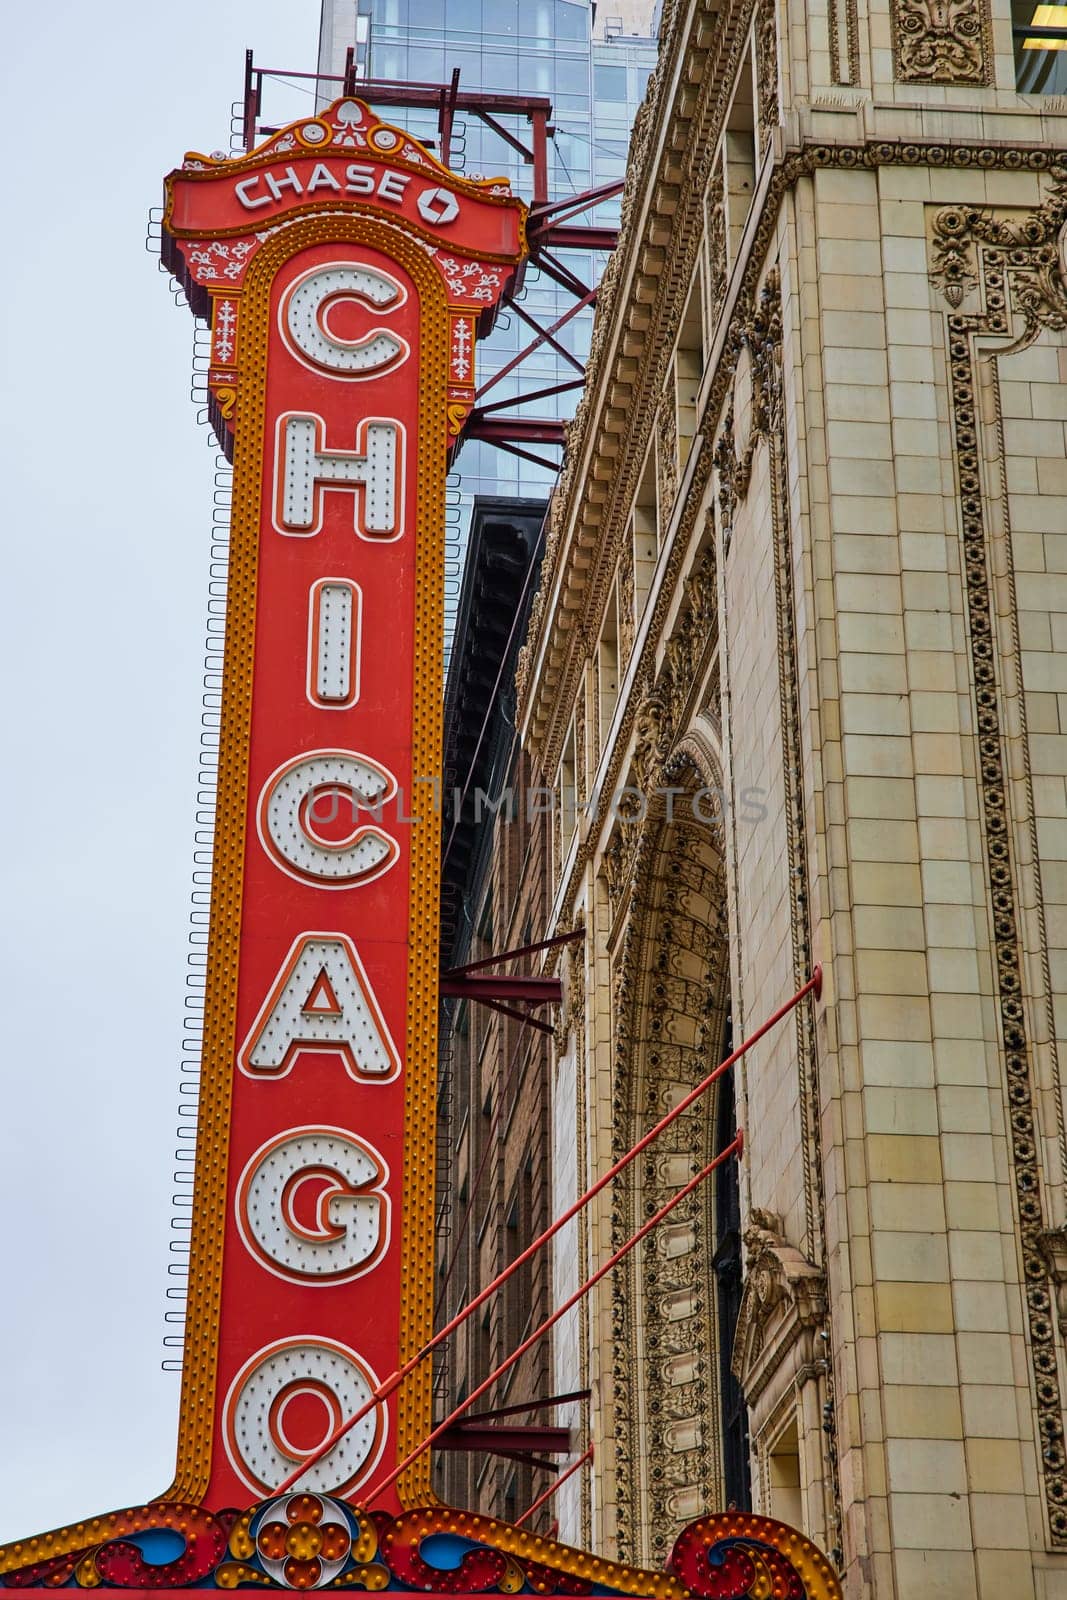 Image of Large orange sign with Chicago in white lettering on white building